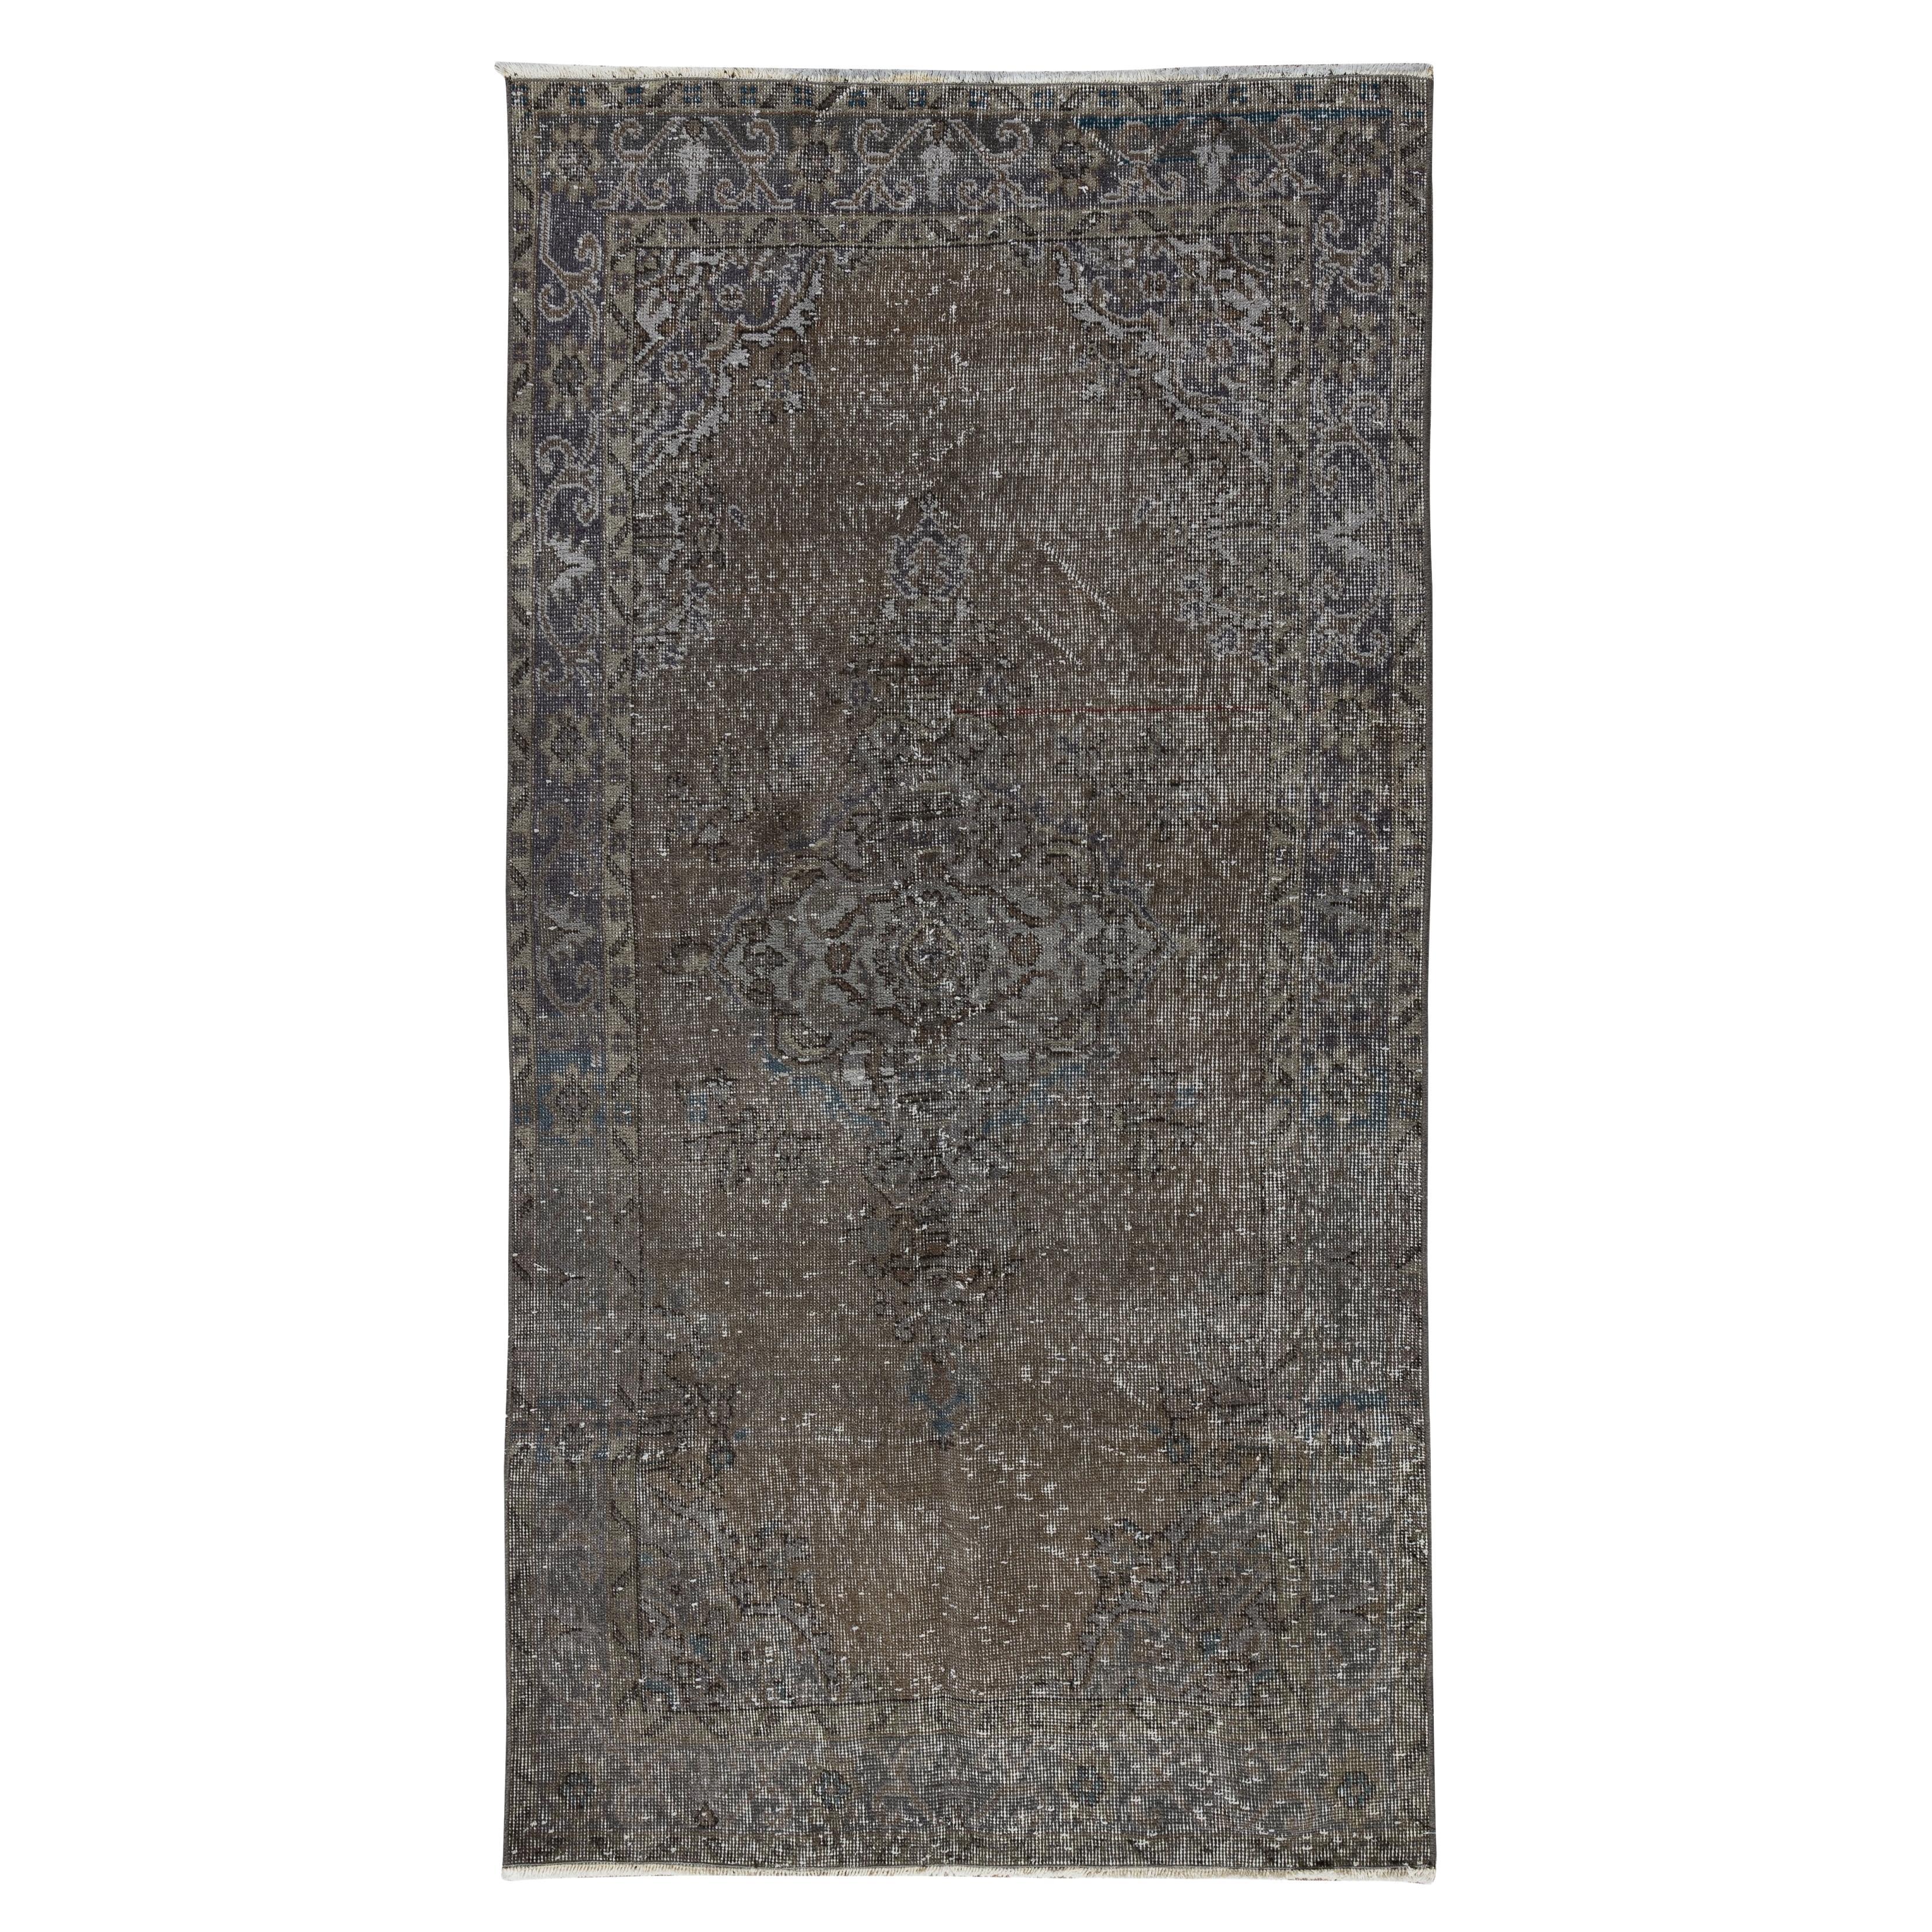 Handmade Turkish Accent Rug in Brown and Gray, Modern Exclusive Carpet